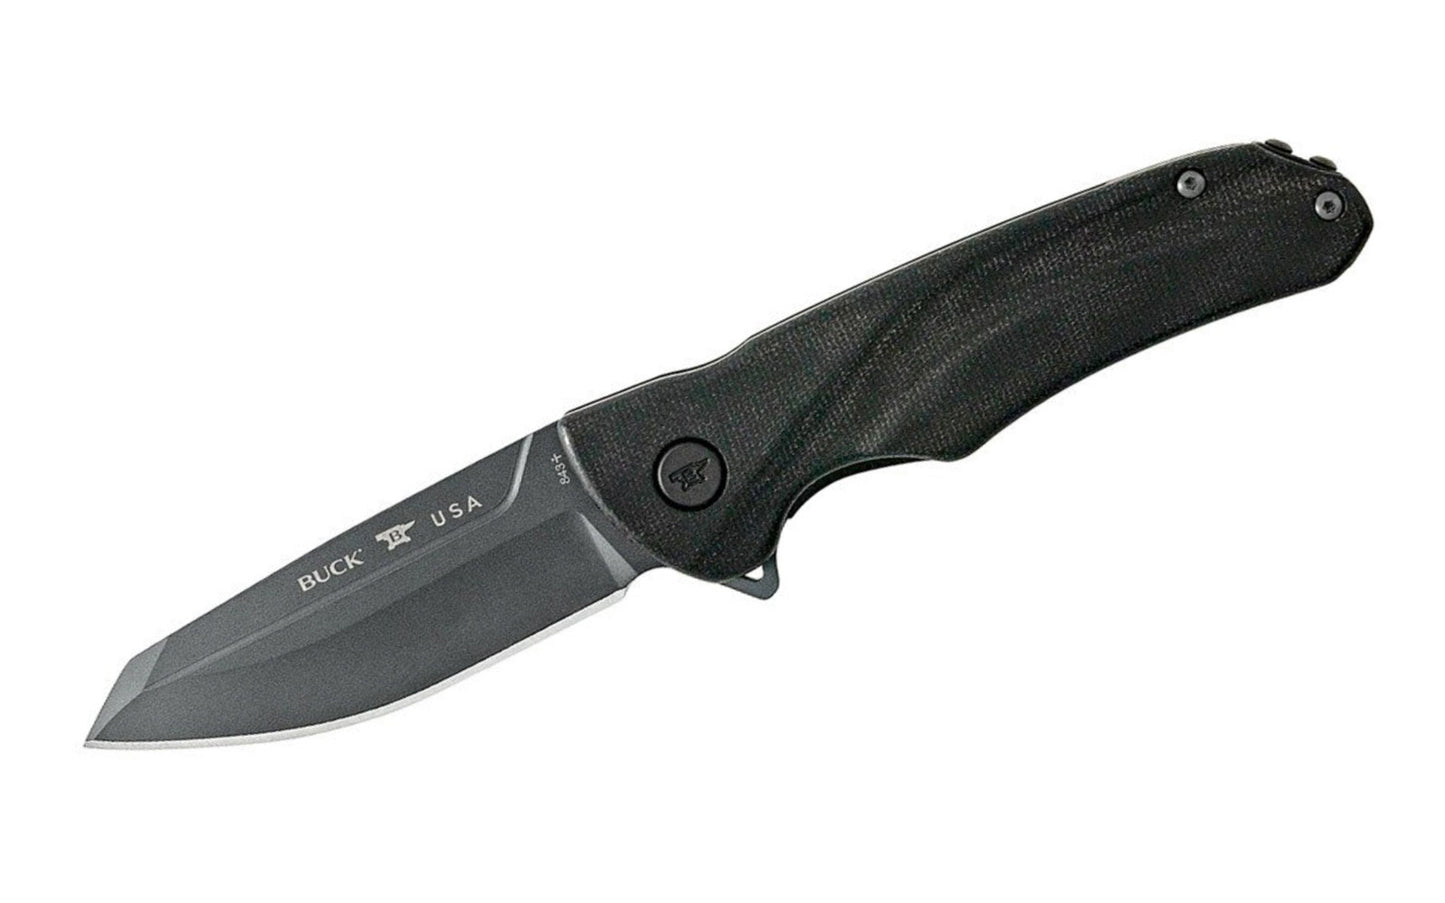 The Buck Knives 843 Sprint OPS Folding Knife has a high speed ball bearing flipper for fast deployment. The reverse tanto blade shape gives gthe knife piercing strength while also giving you the smooth cutting surface of a drop point. The blade is made of S30V steel. Made in USA. Model 0843BKS-B